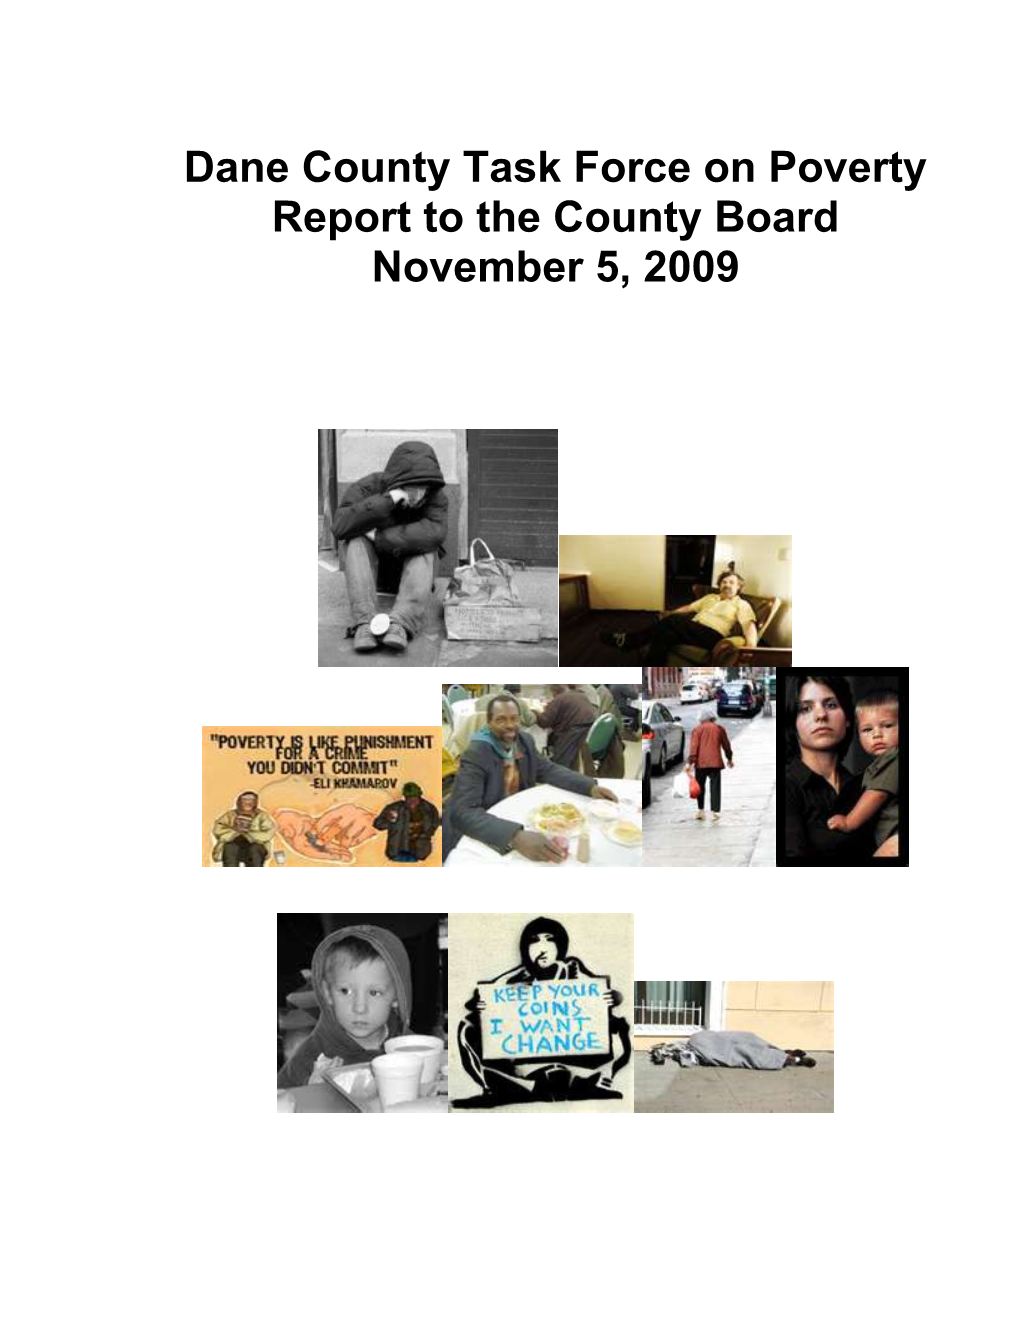 Dane County Task Force of Poverty